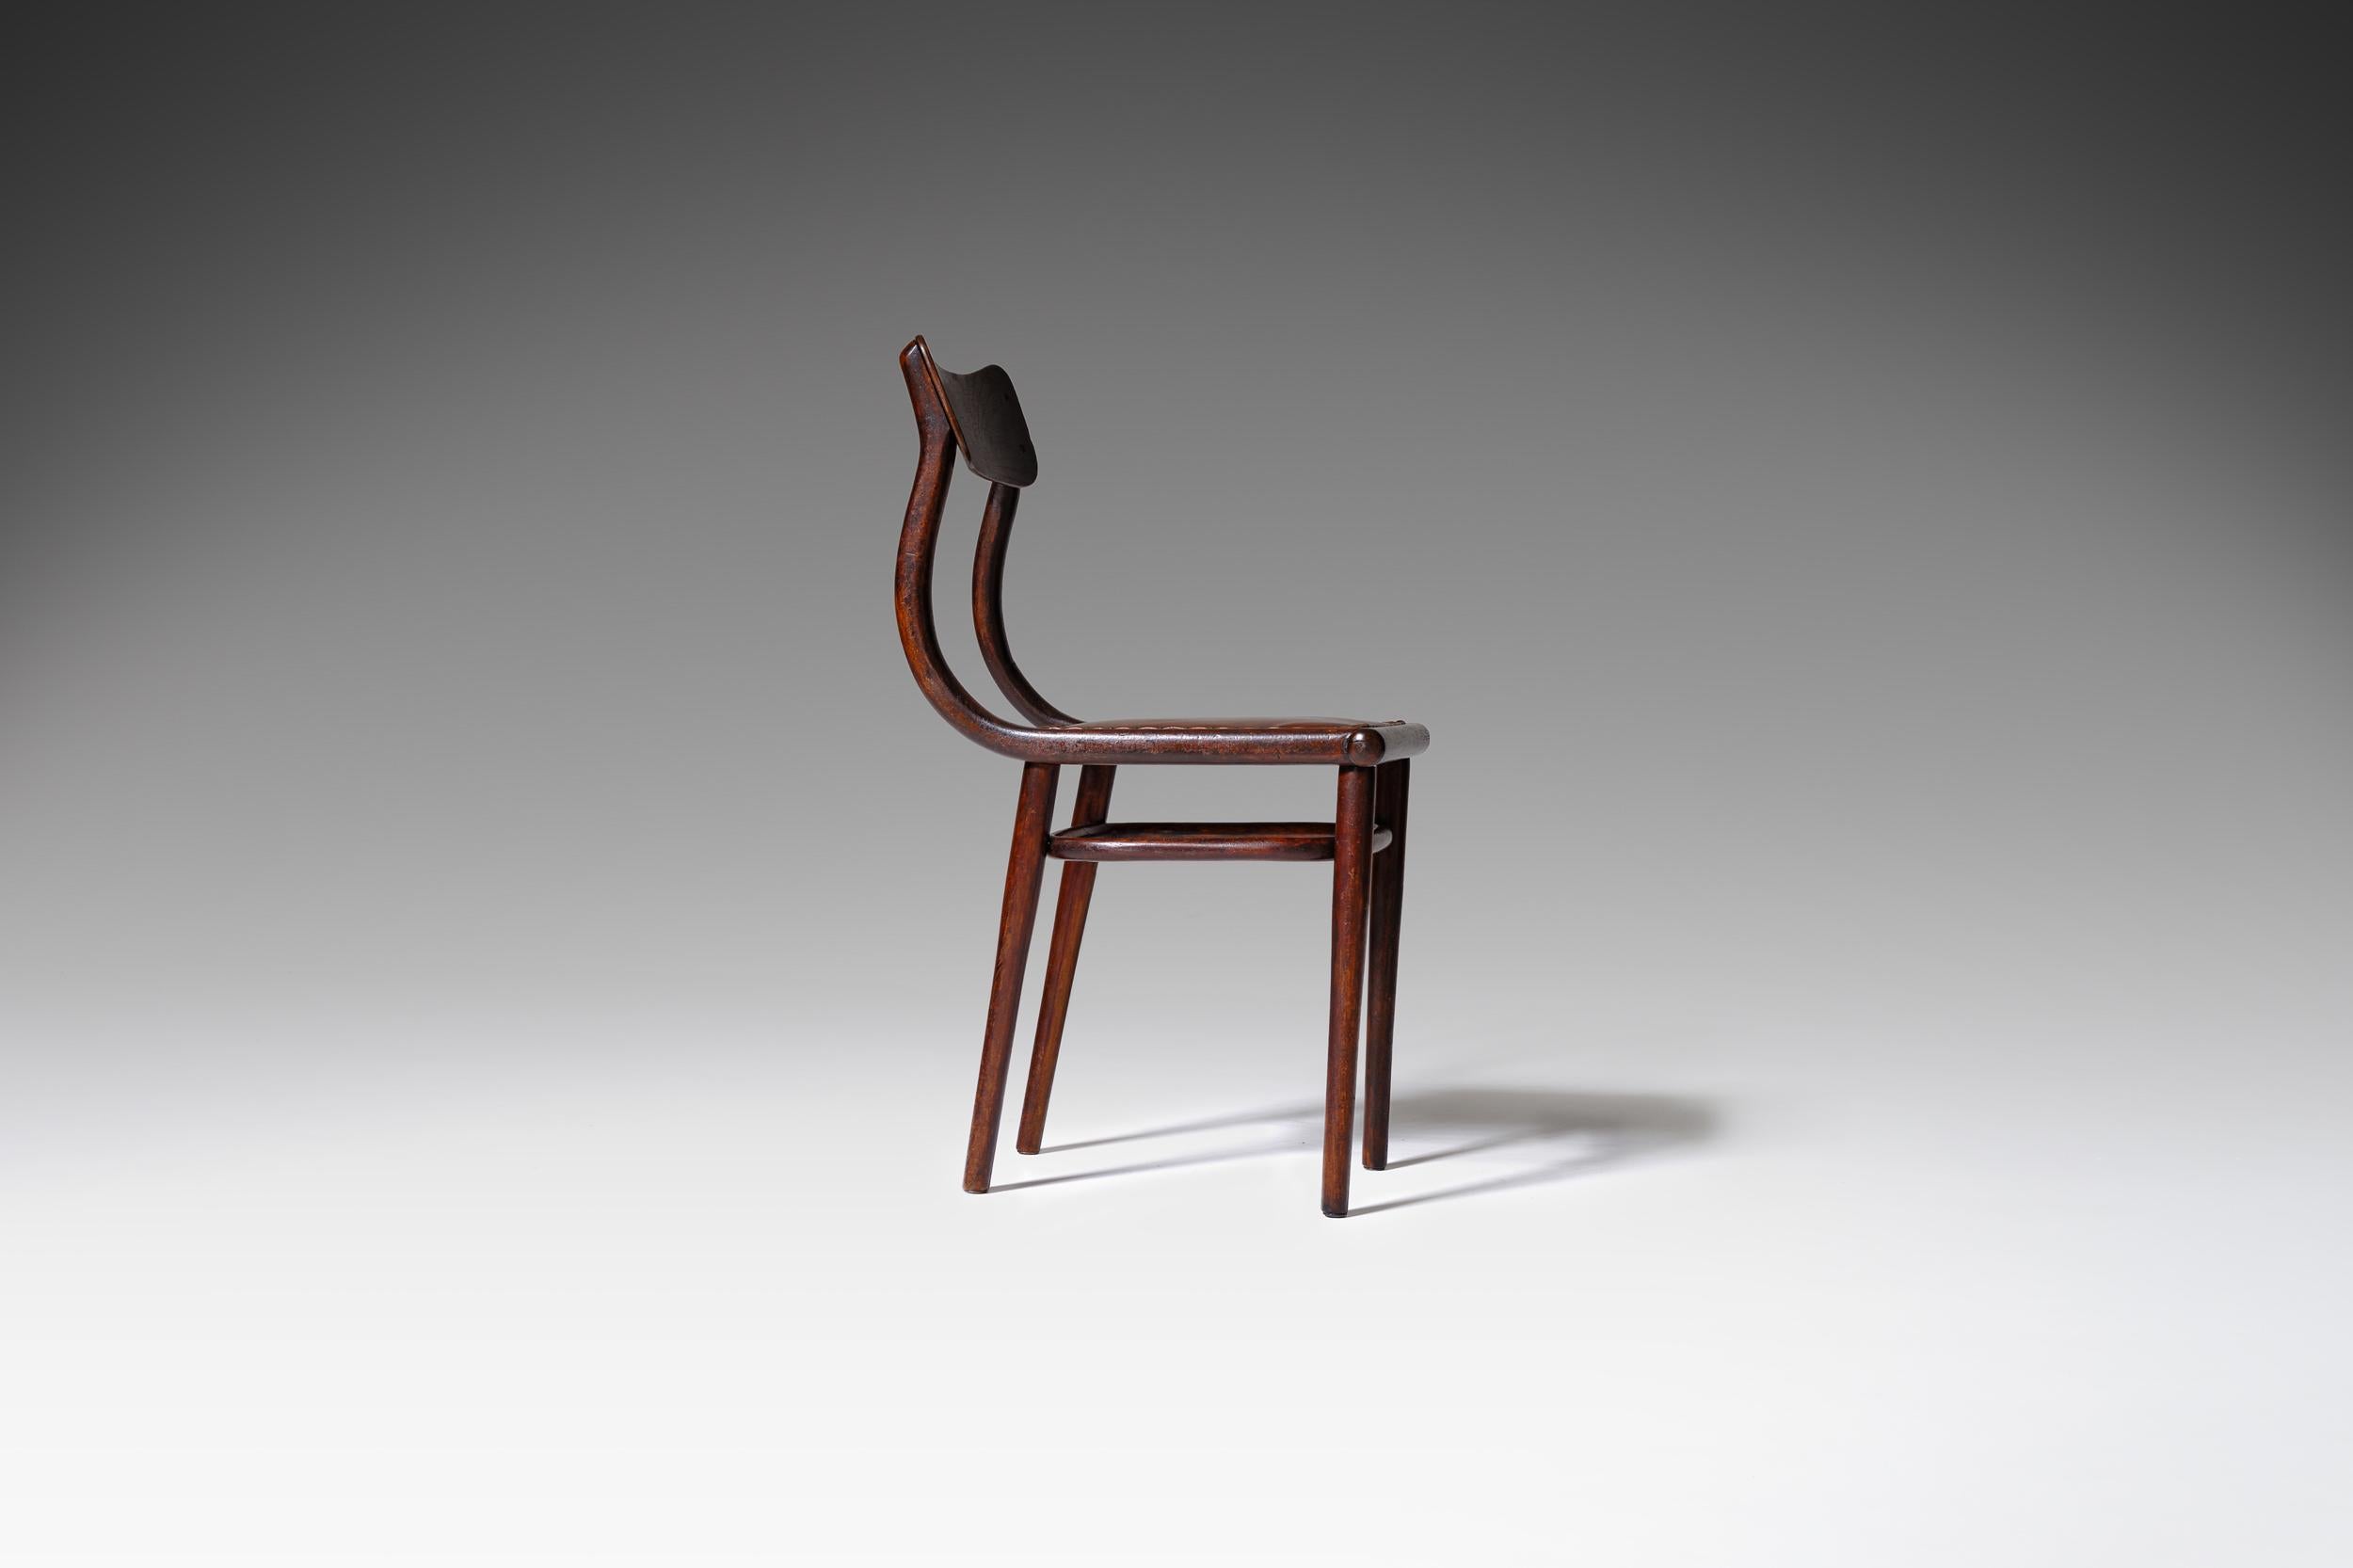 German Thonet Side Chair with Cognac Leather Seat, Early 1900